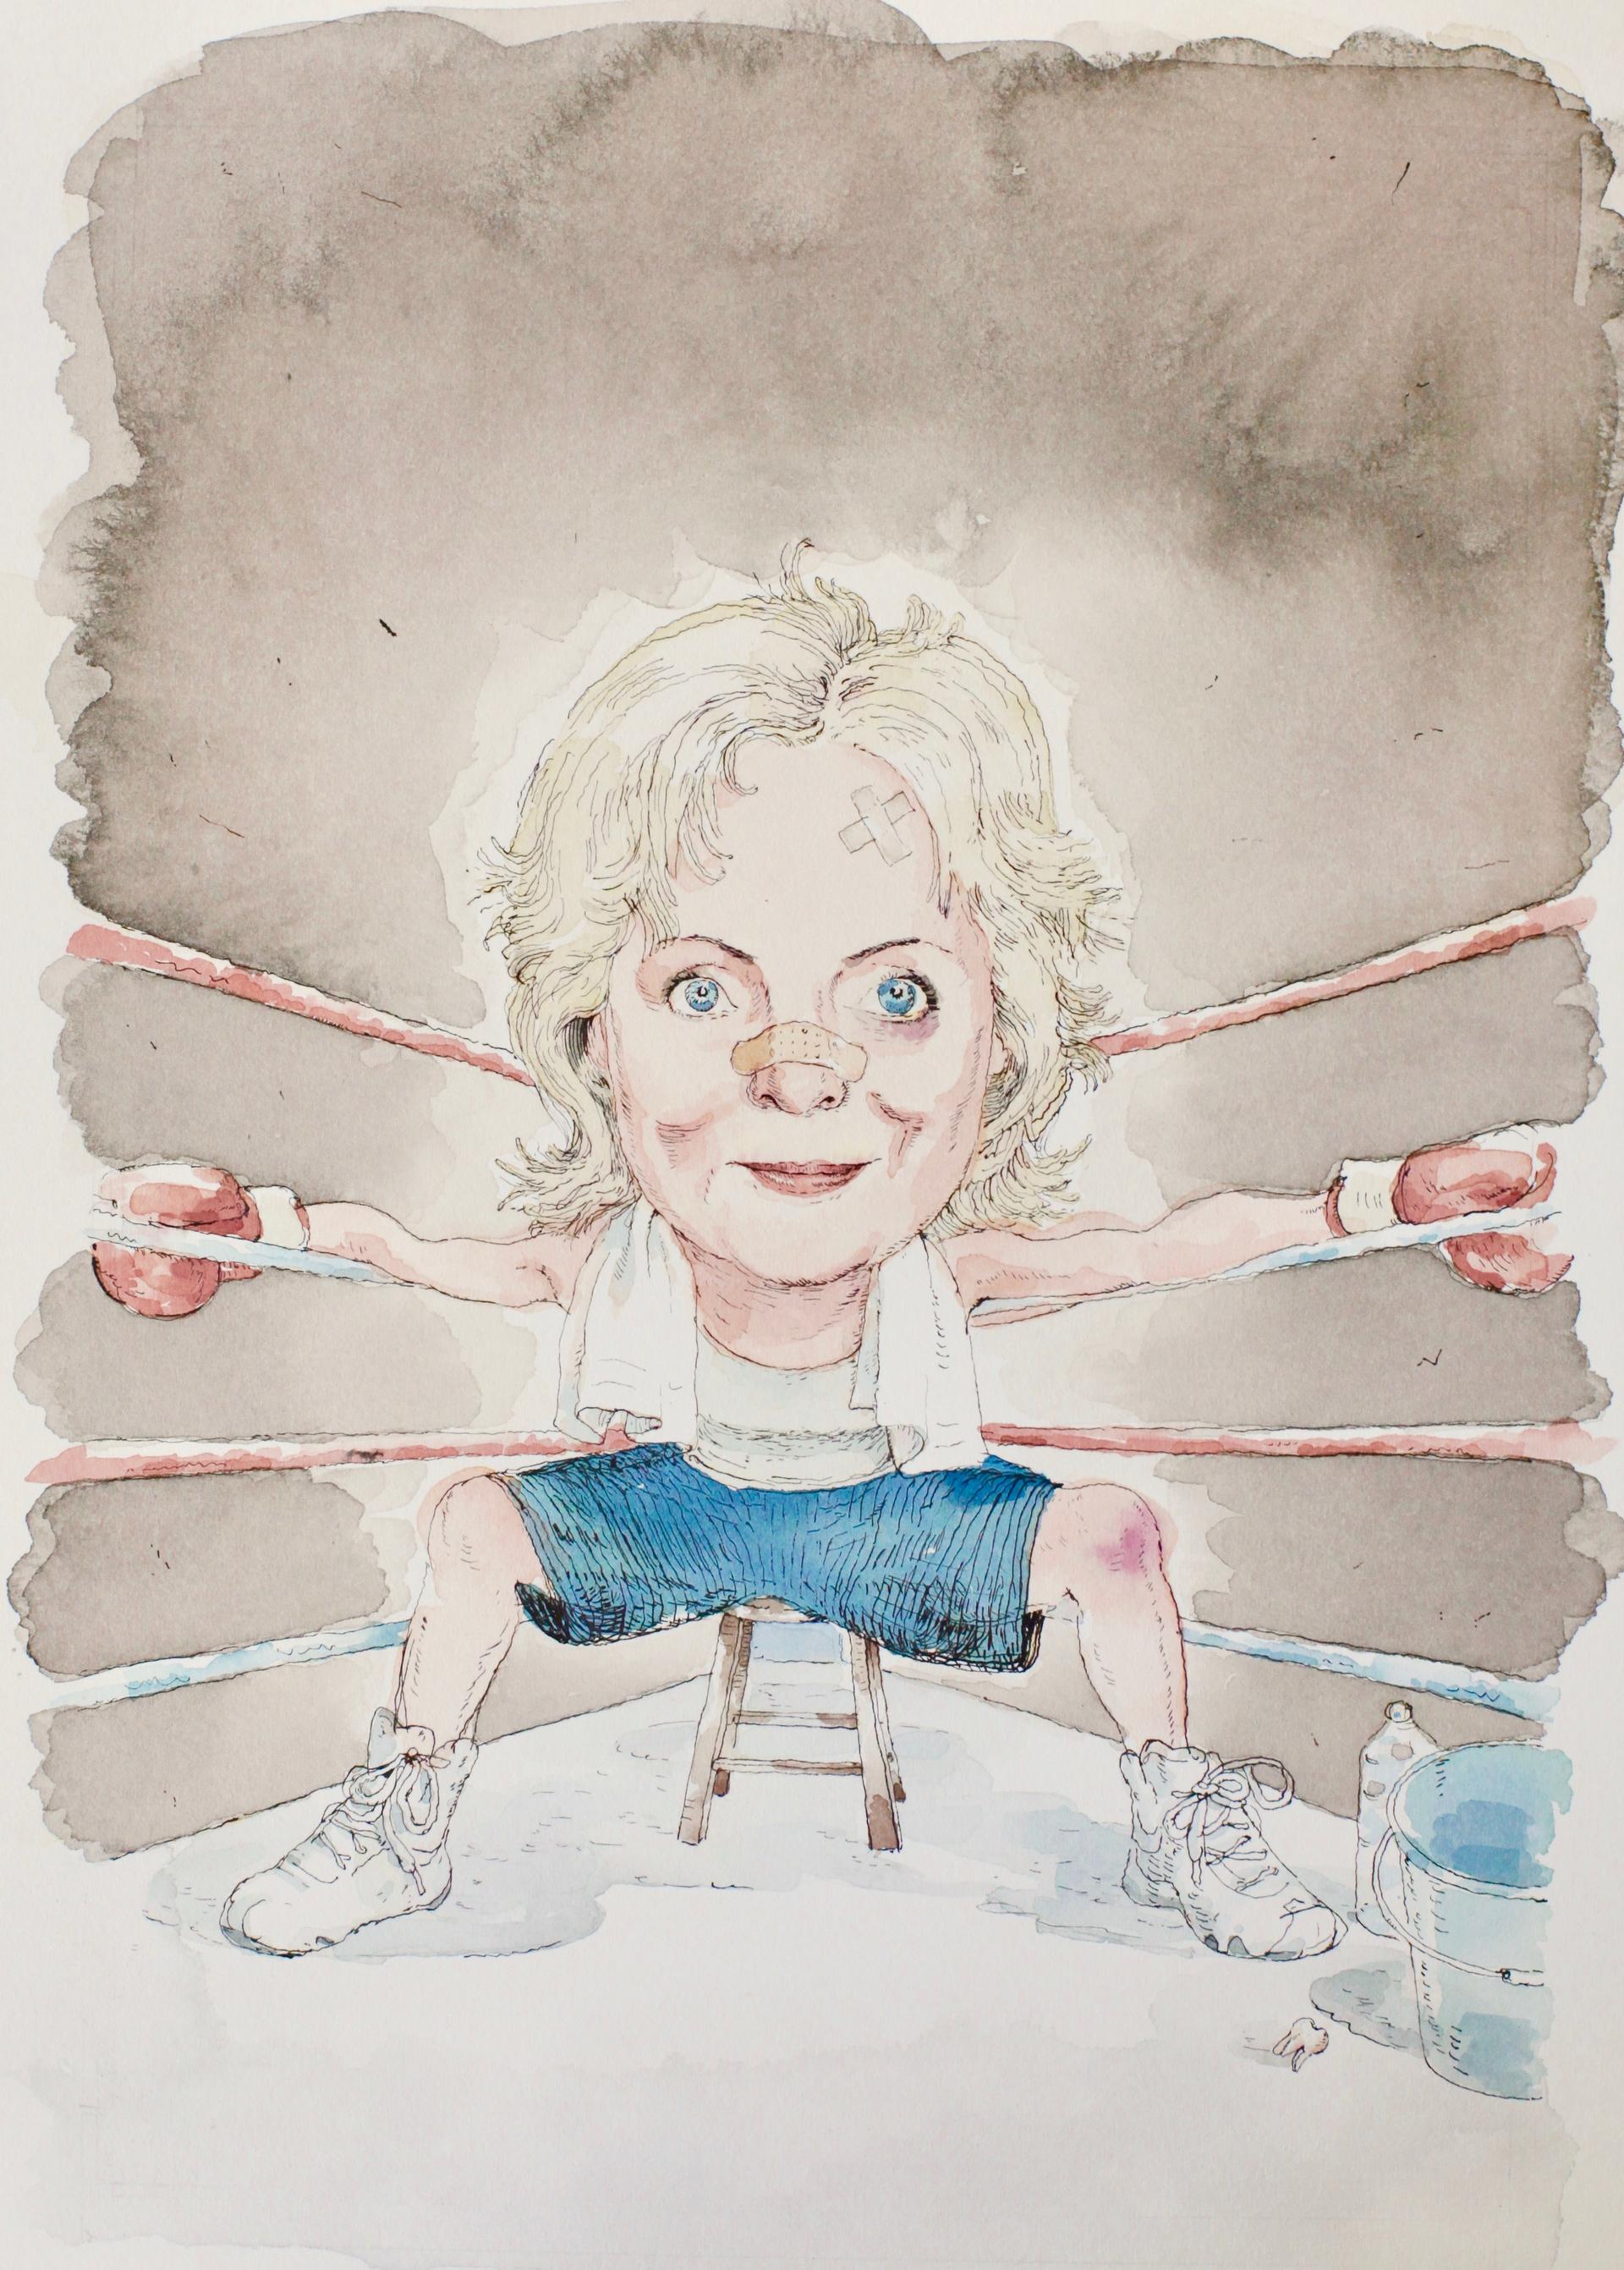 Original artwork of Hillary Clinton for New Yorker cover “Ready for a Fight”